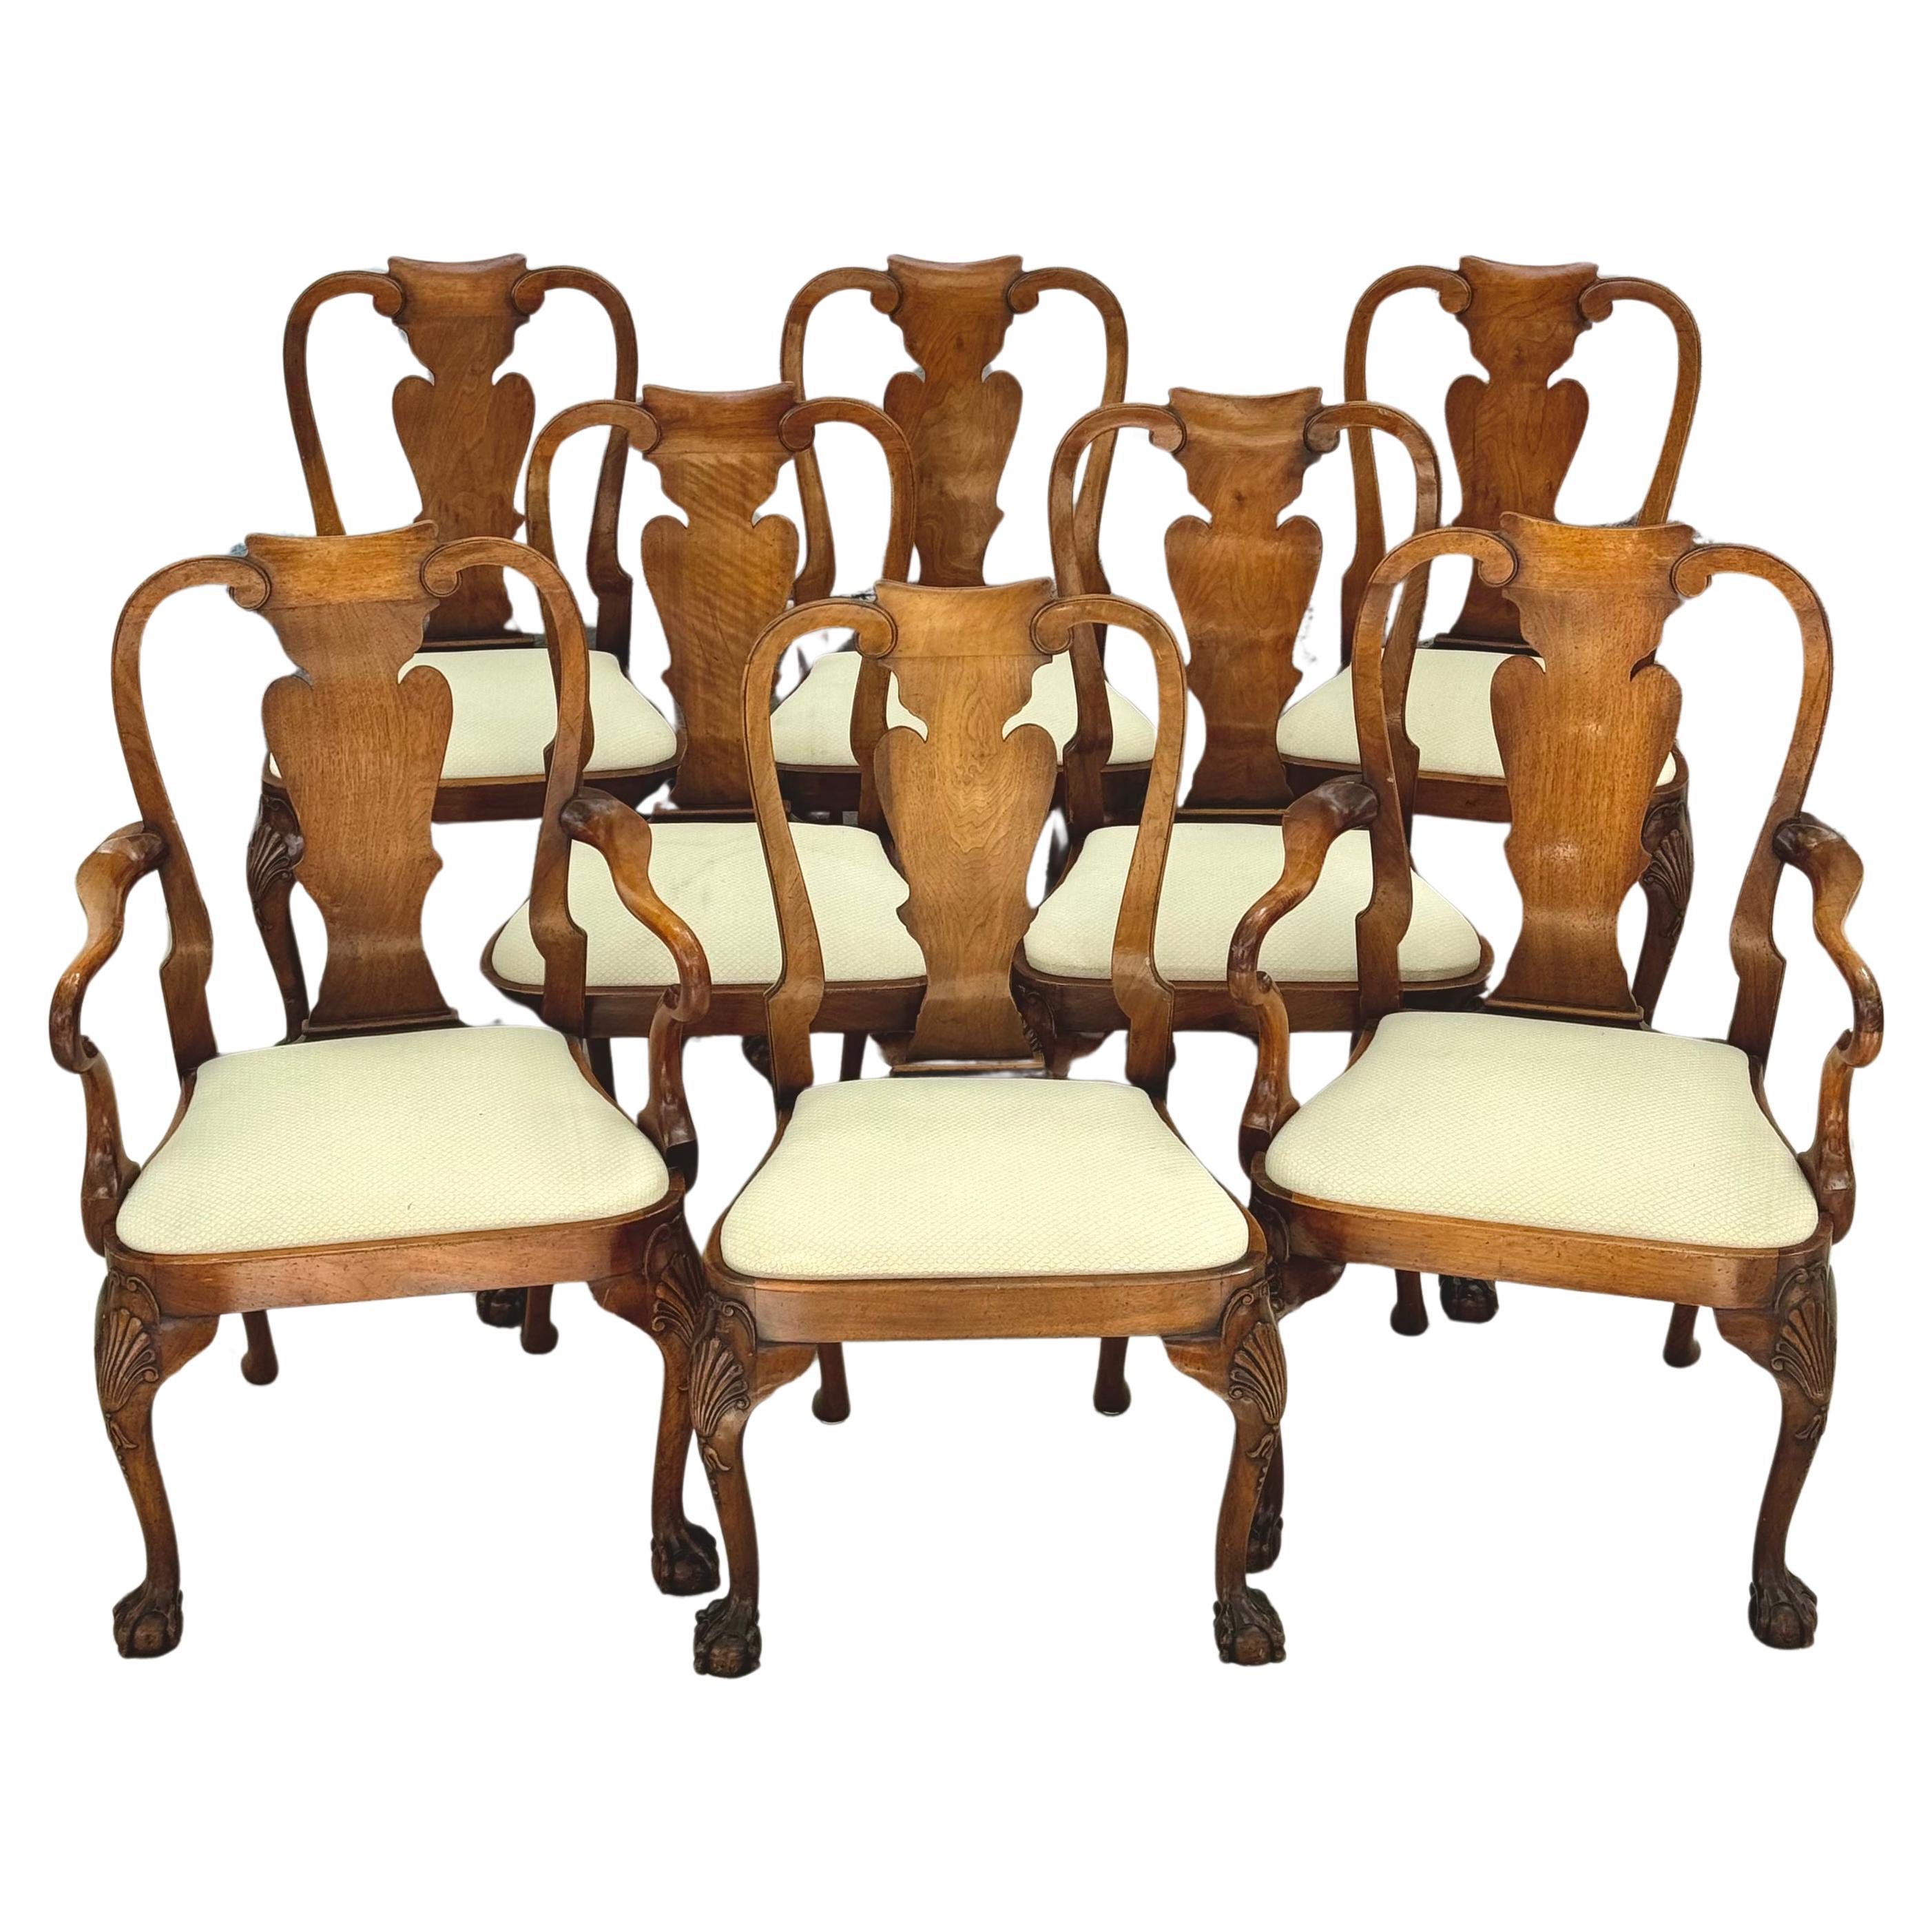 Exquisite set of eight George II Style walnut dining room chairs. There are two arm chairs and four side chairs in set. Each with shaped top rails above a vase-shaped vertical splat, with a drop-in seat above scallop-shell headed cabriole front legs